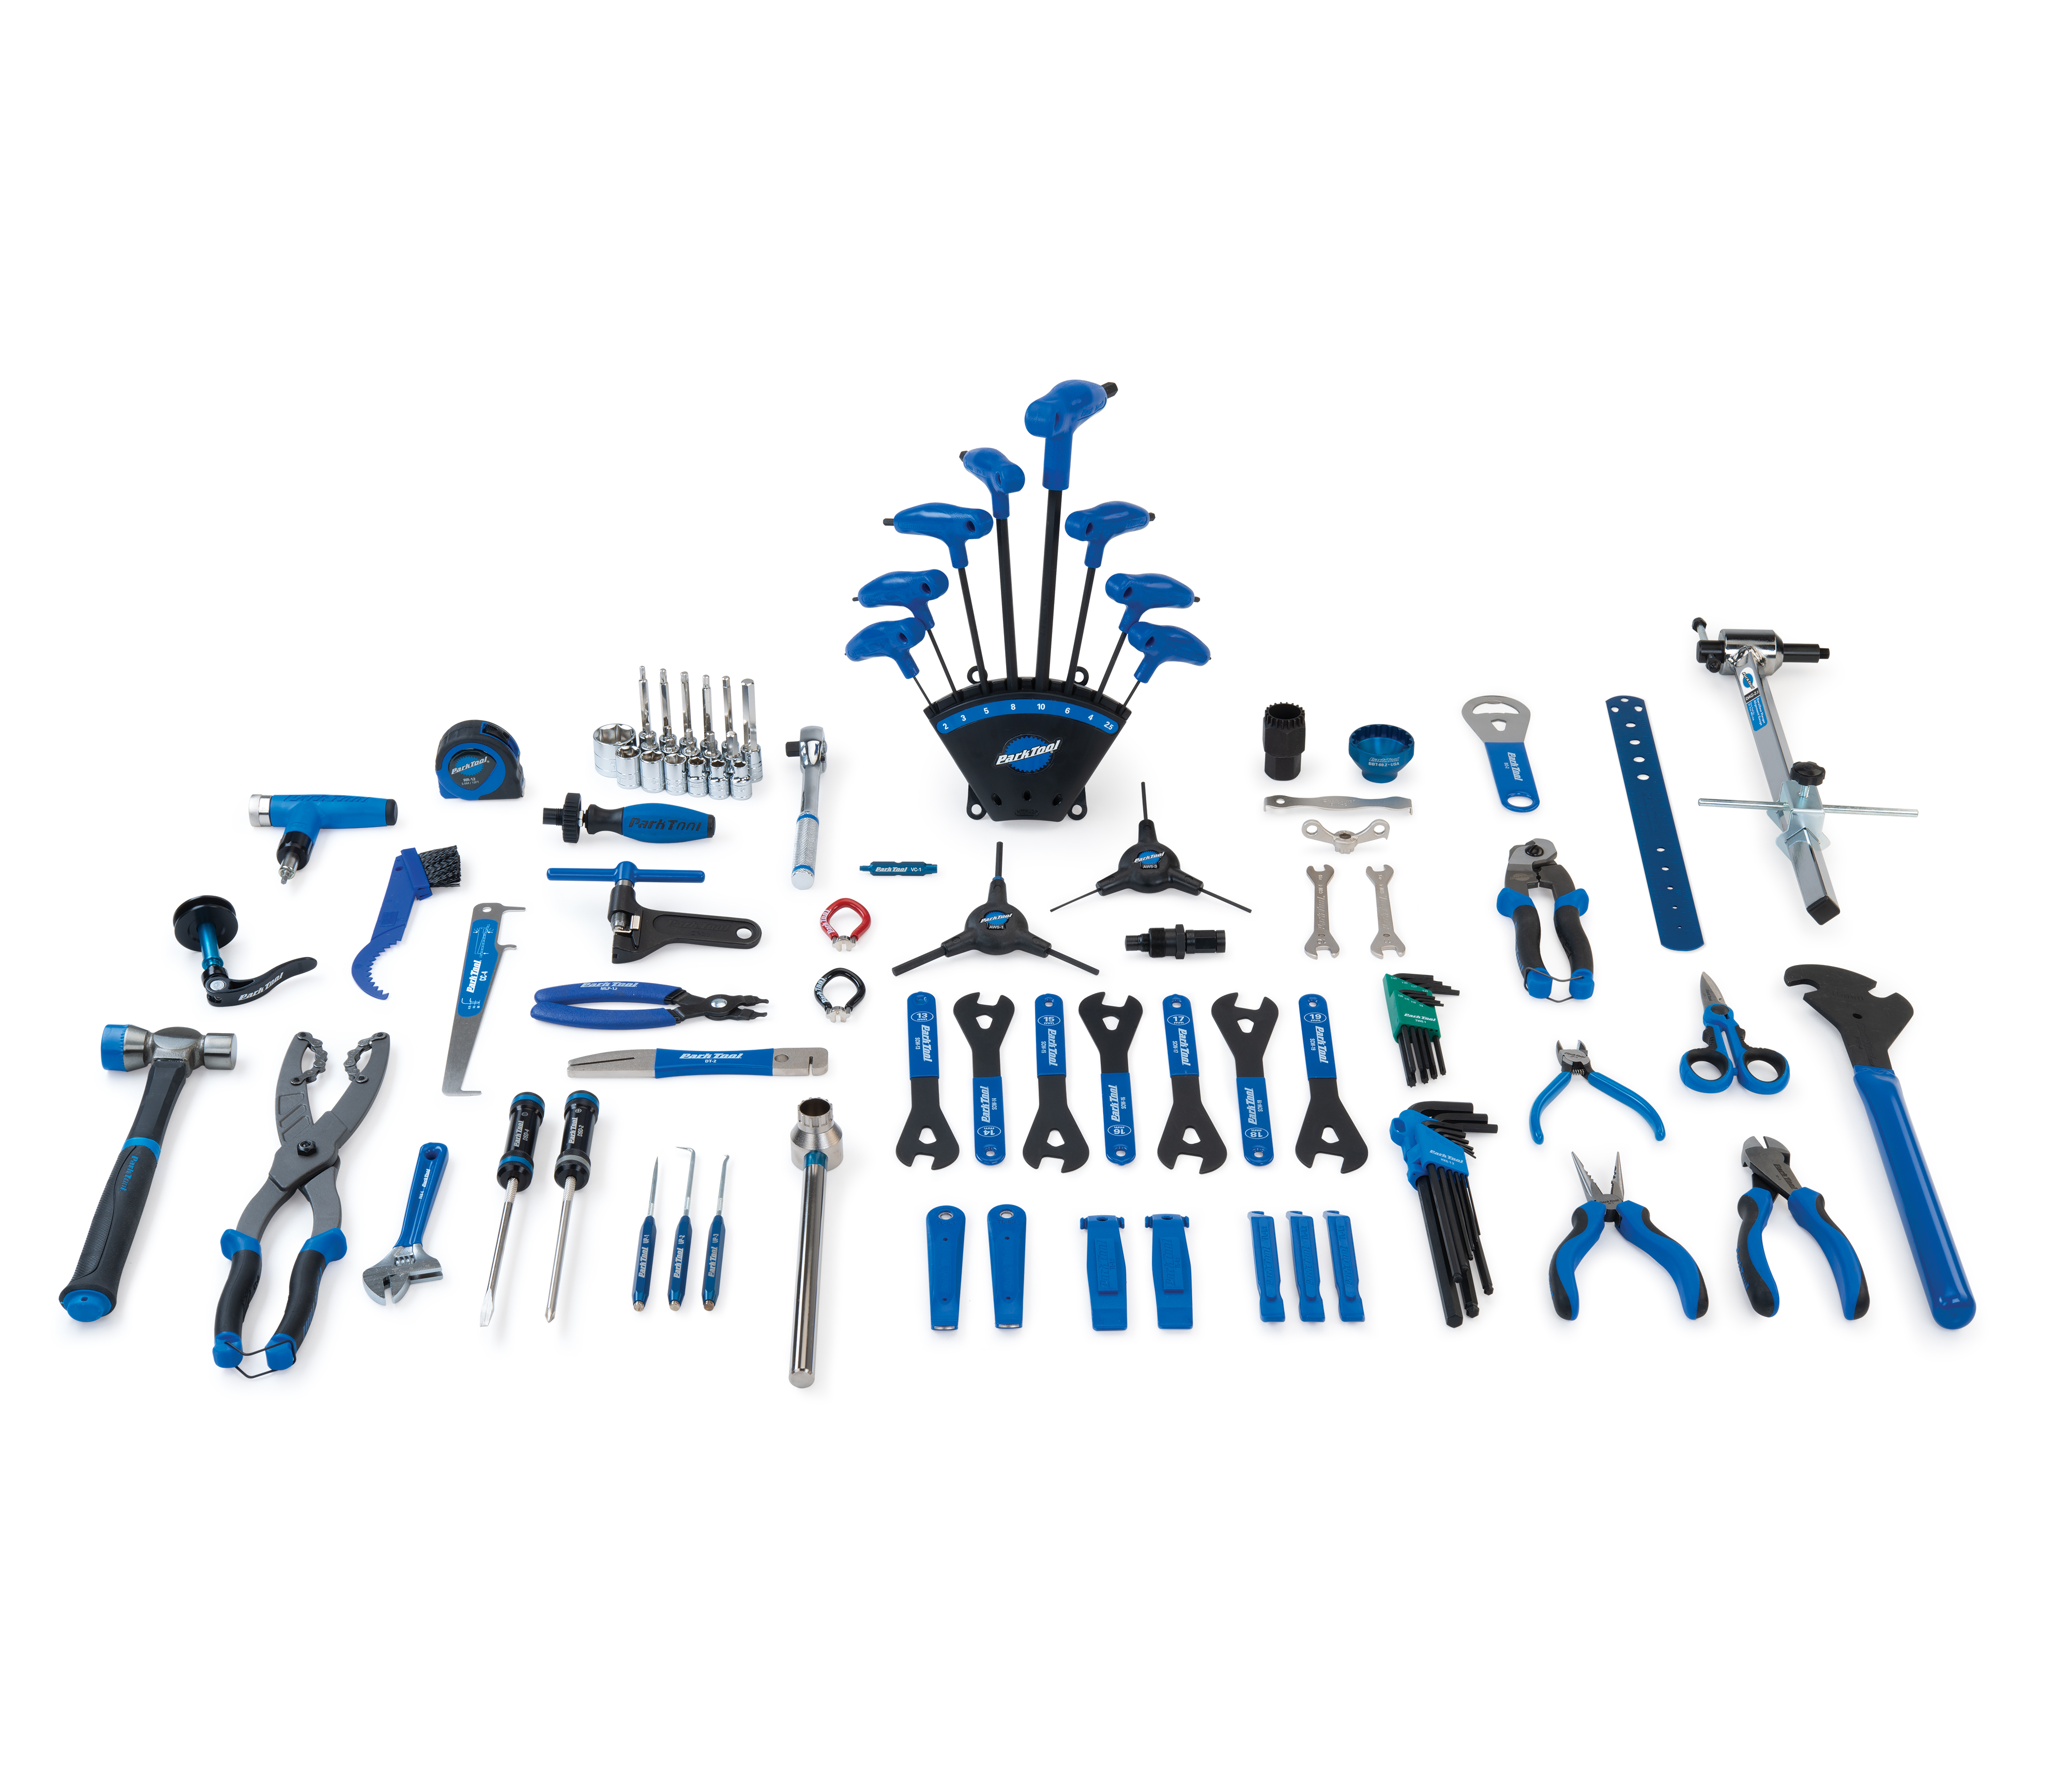 Contents of the Park Tool PK-5 Professional Tool Kit